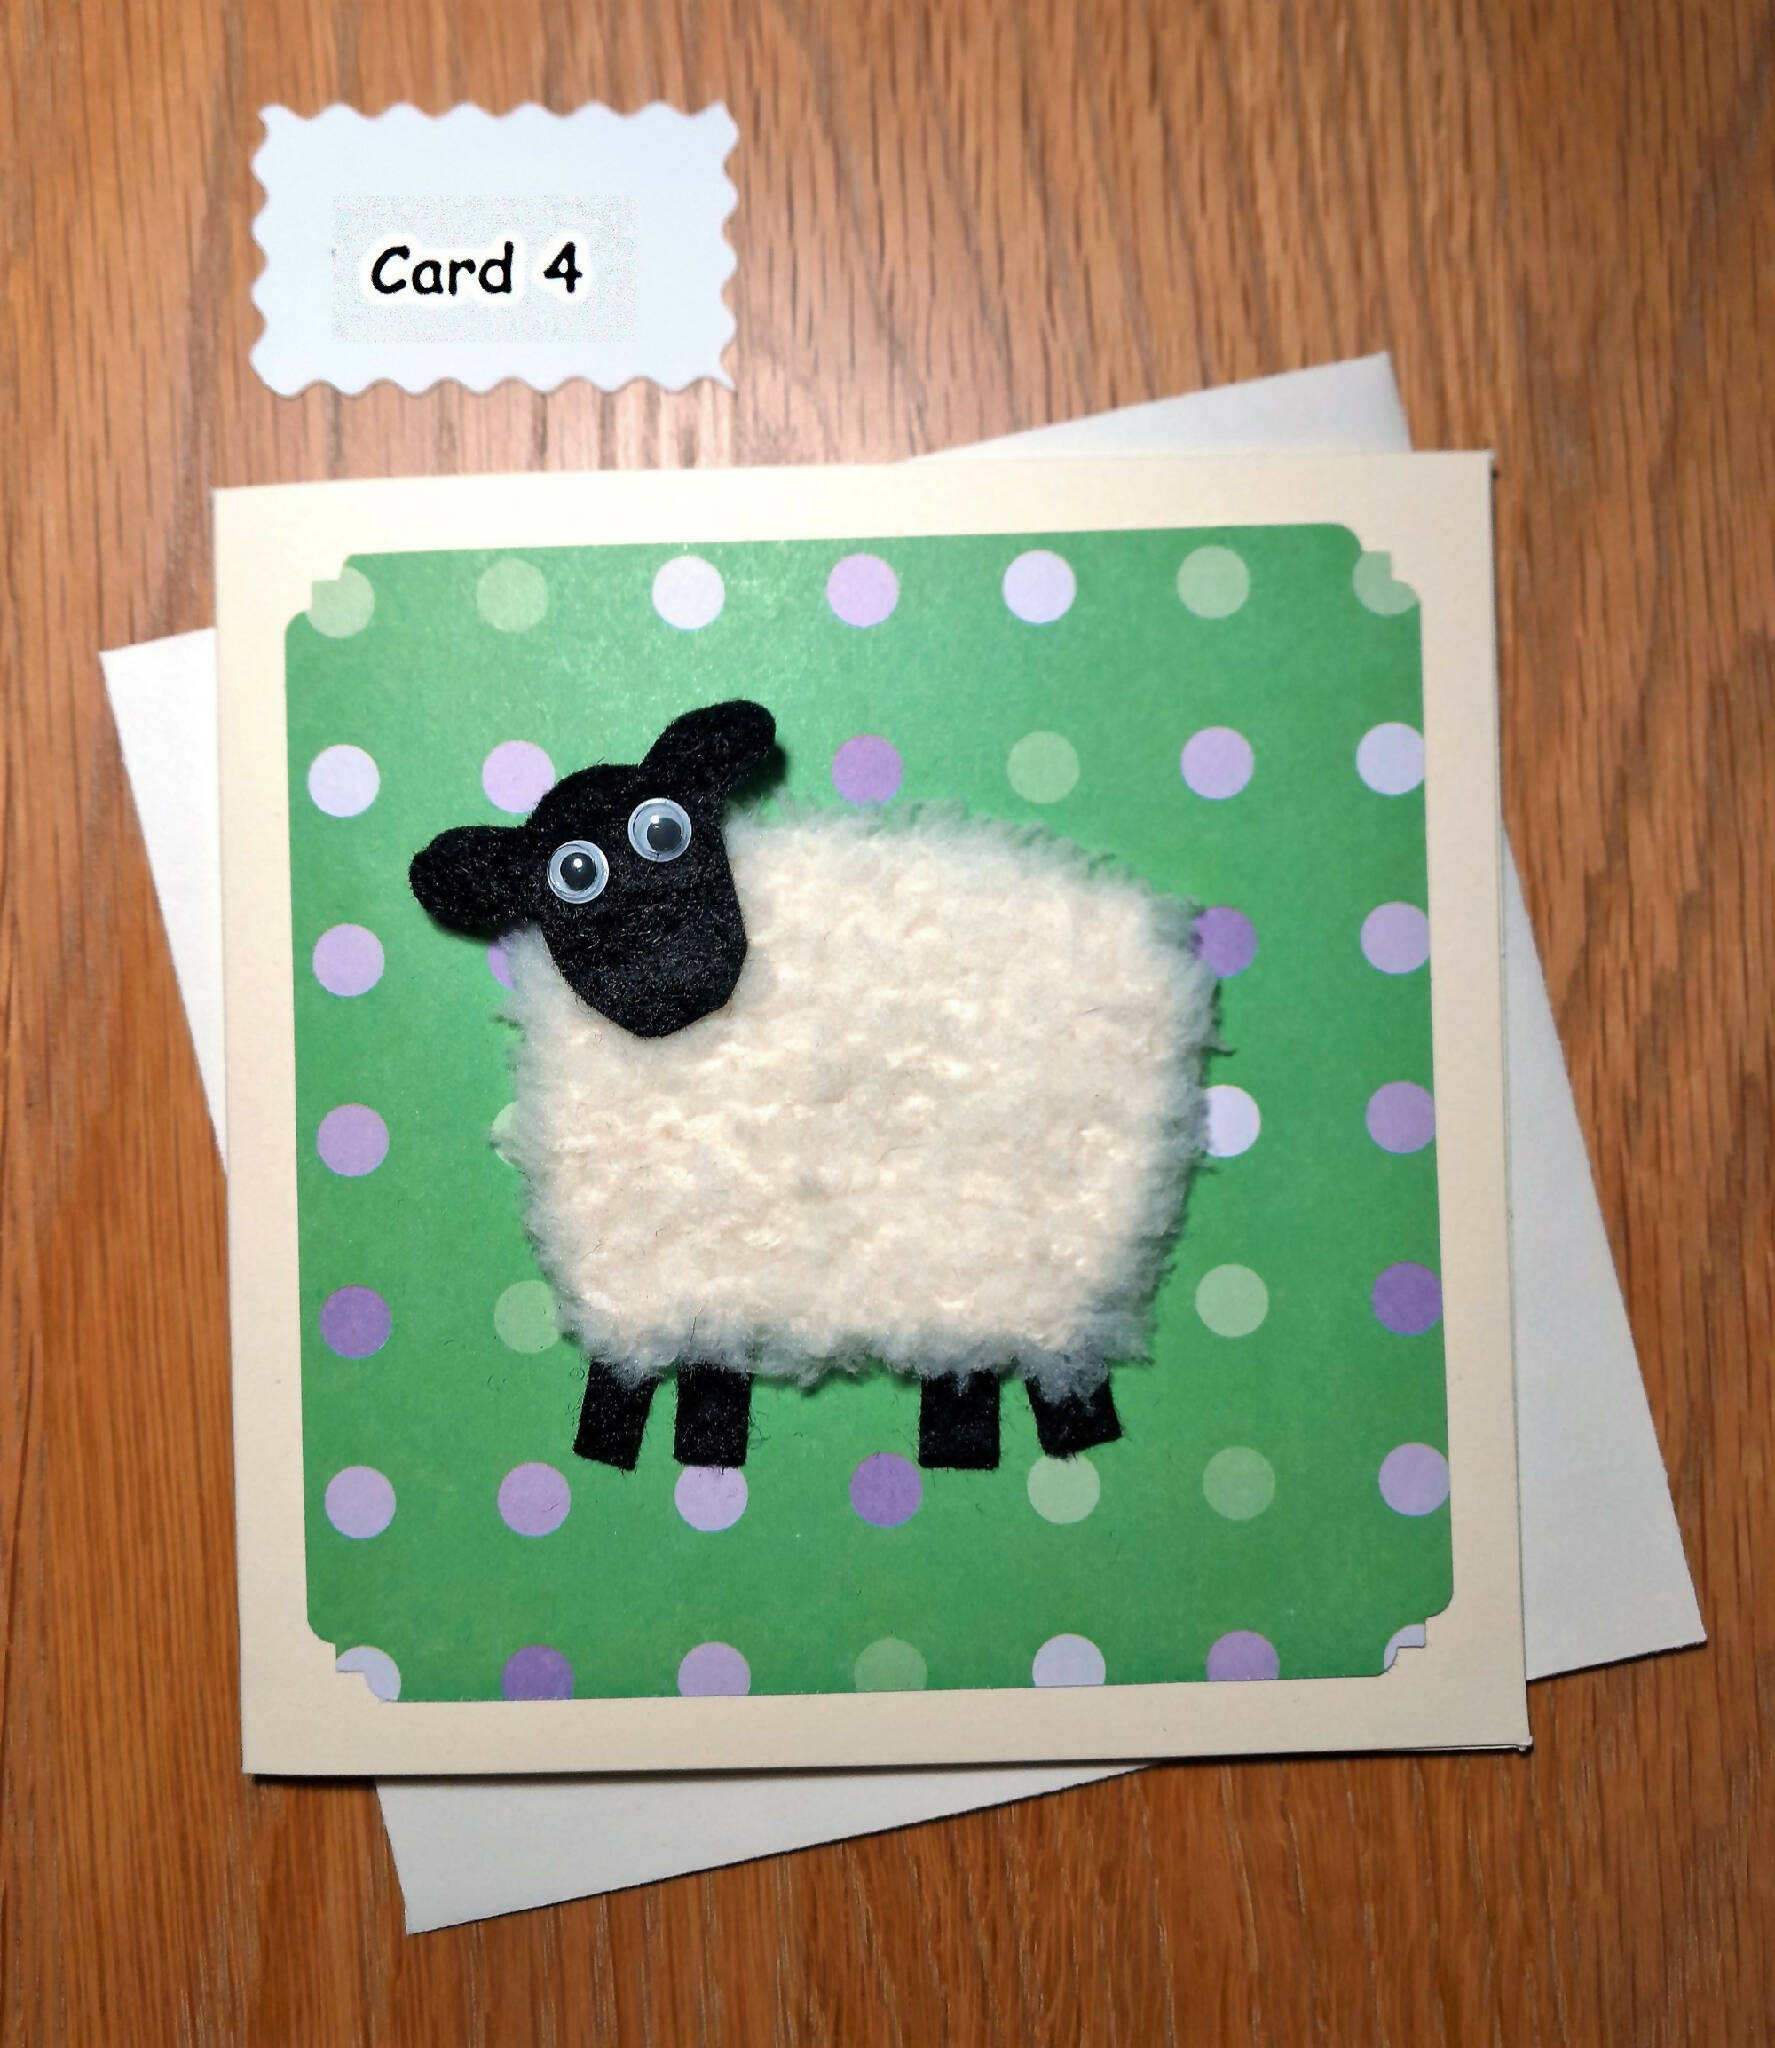 Knitted Sheep Greetings Card